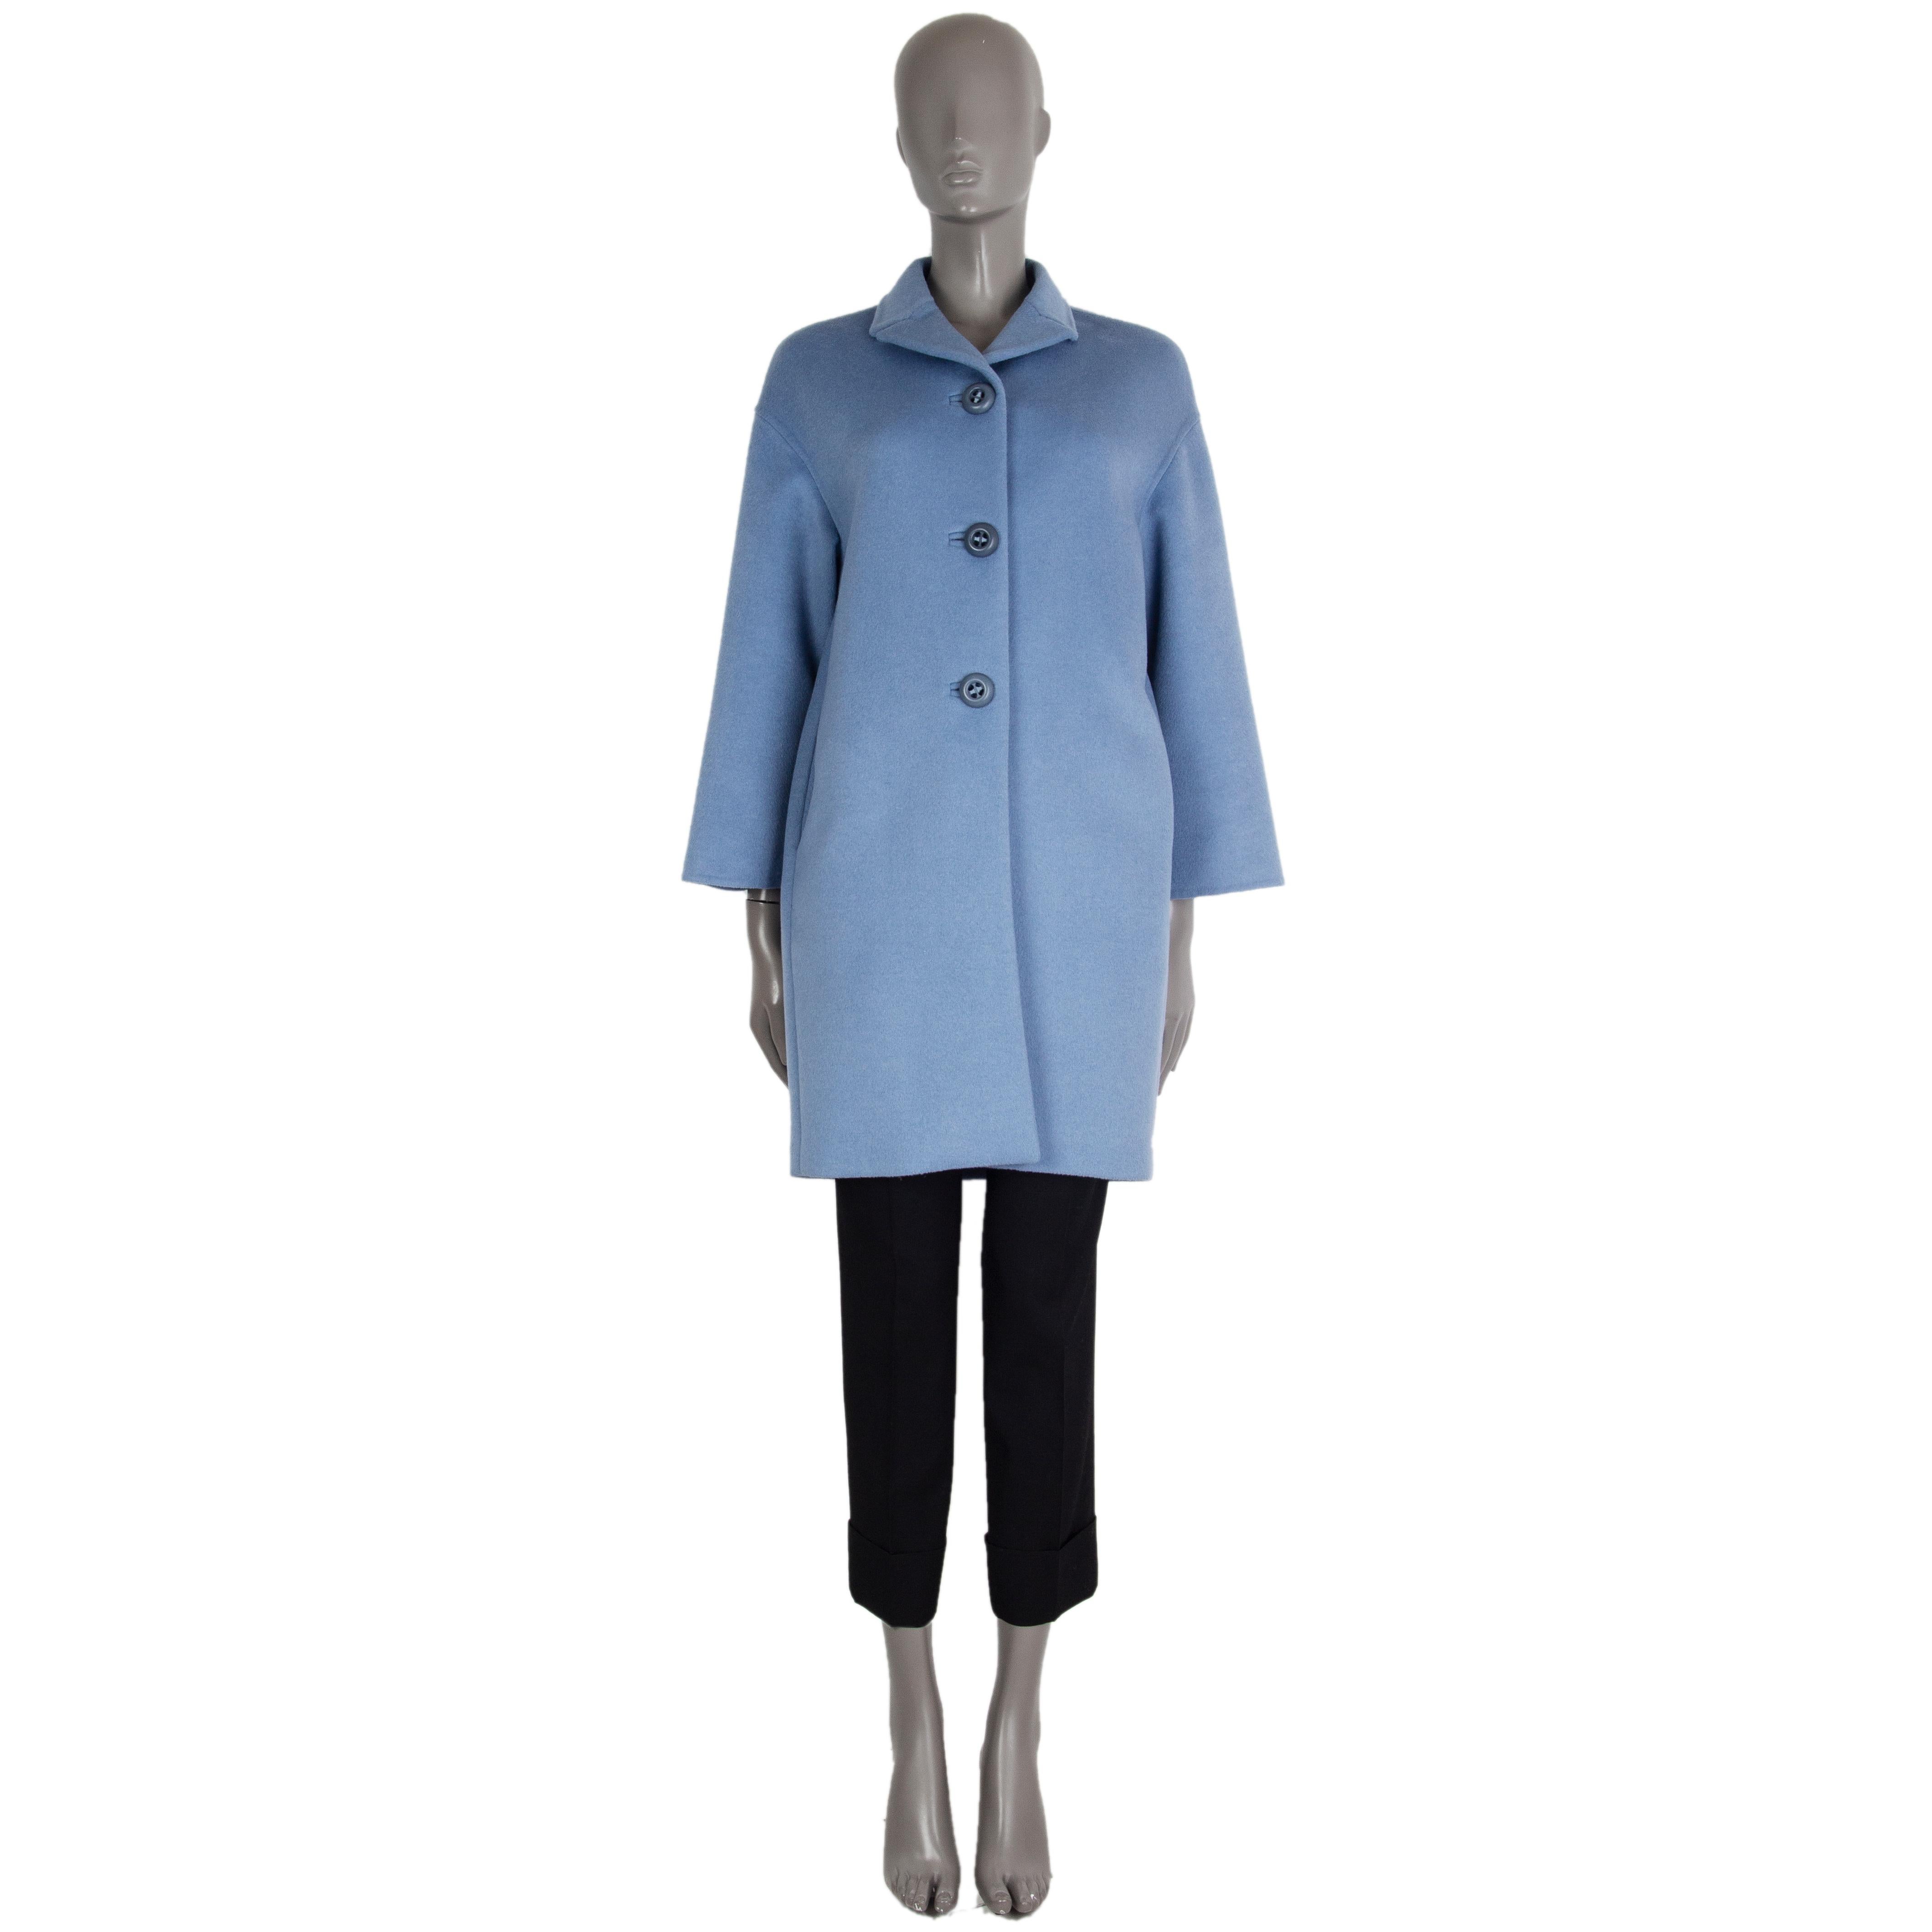 100% authentic Prada single breasted coat in sky blue virgin wool (55%), angora (40%) and cashgora (5%) with a notch collar. Closes on the front with buttons. Lined in viscose (100%). Has been worn and is in excellent condition.  

Measurements
Tag